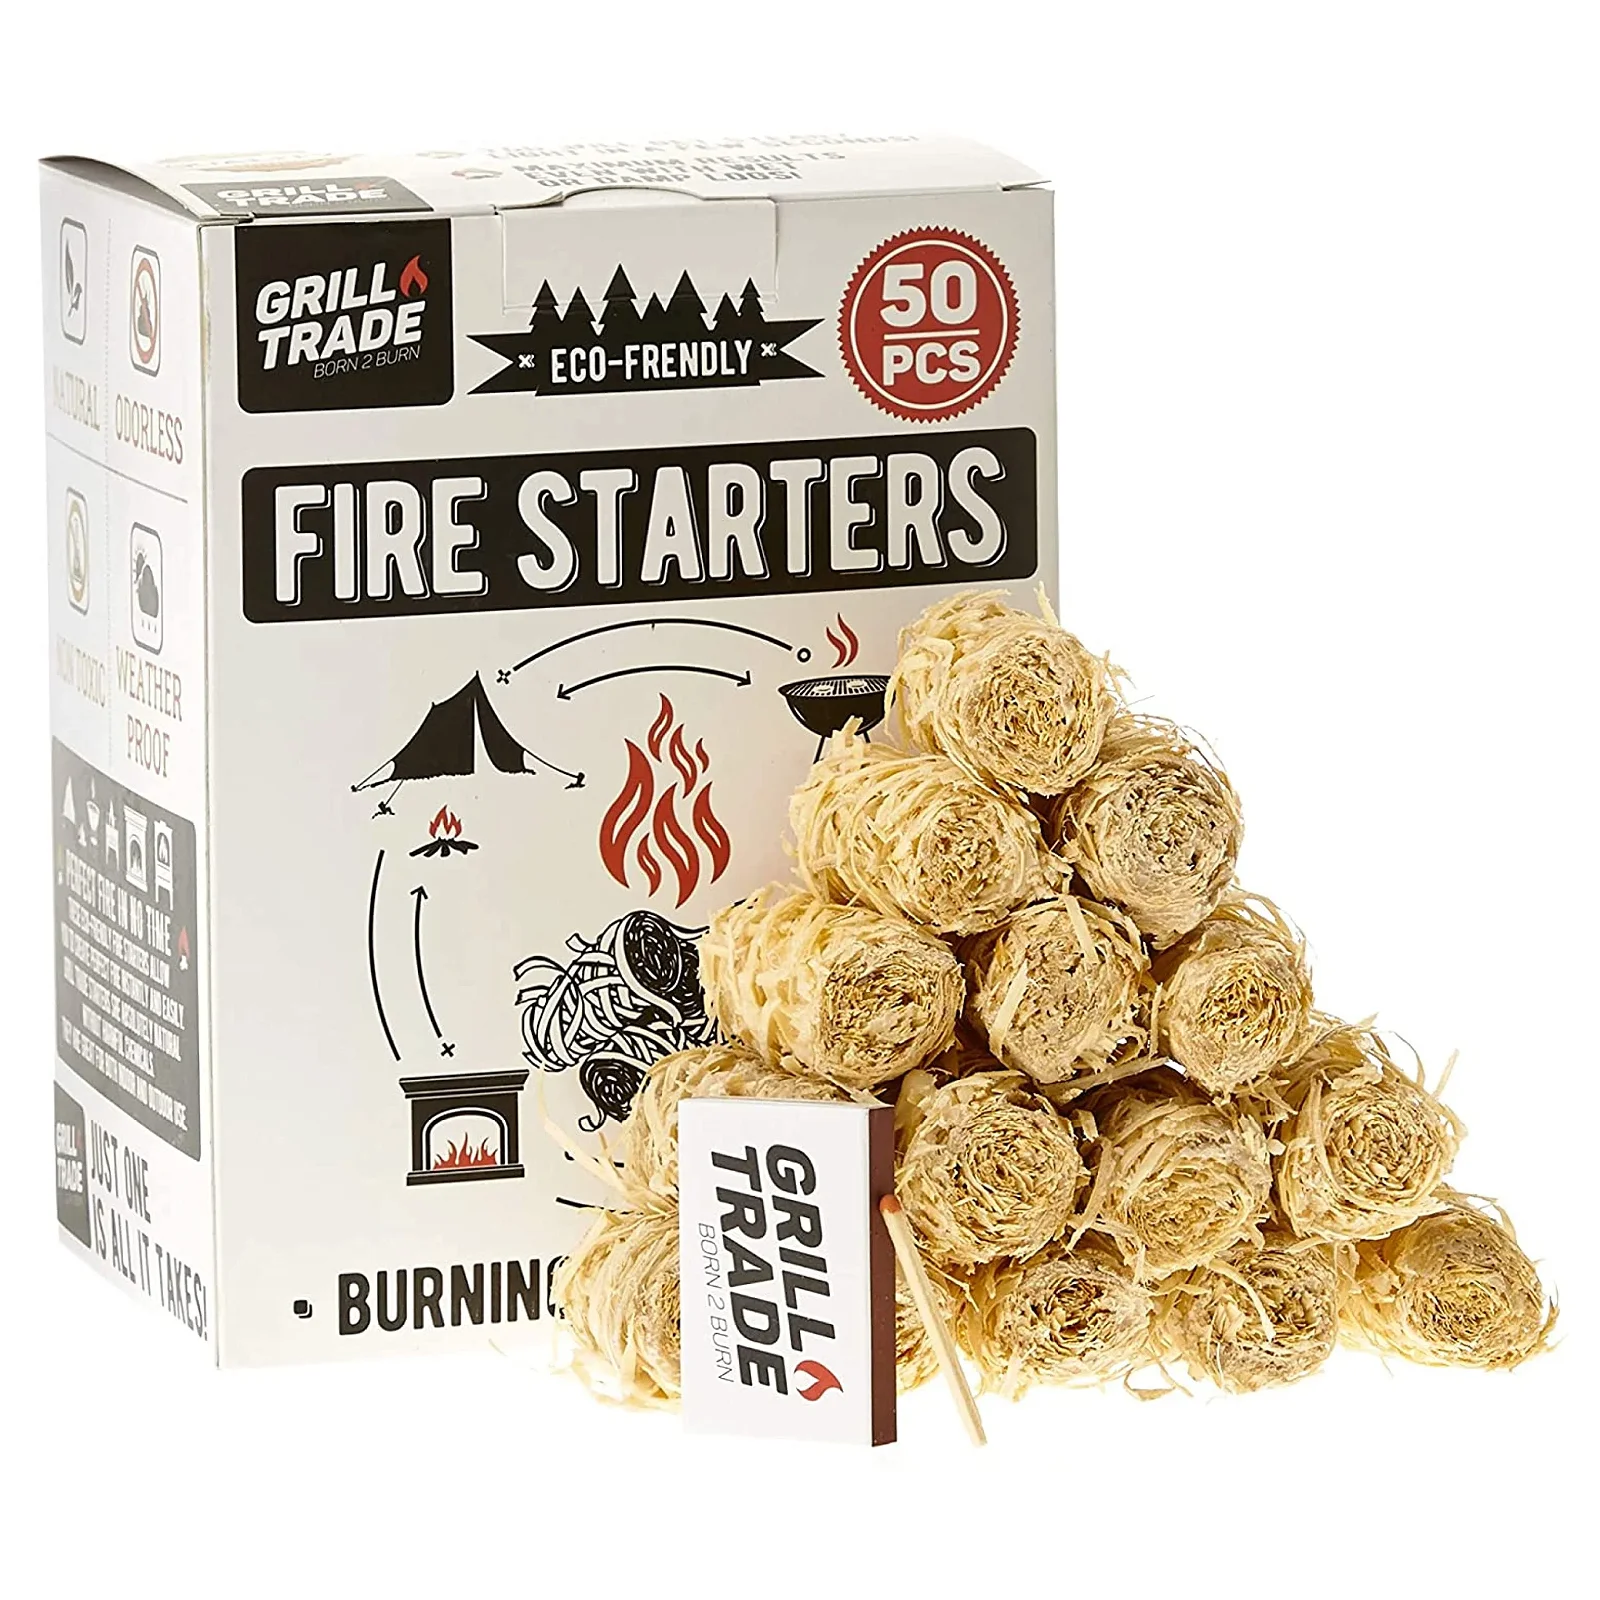 Image of Firestarters 50 Pcs | Natural Fire Starters For Fireplace, Wood Stove, Campfires, Fire